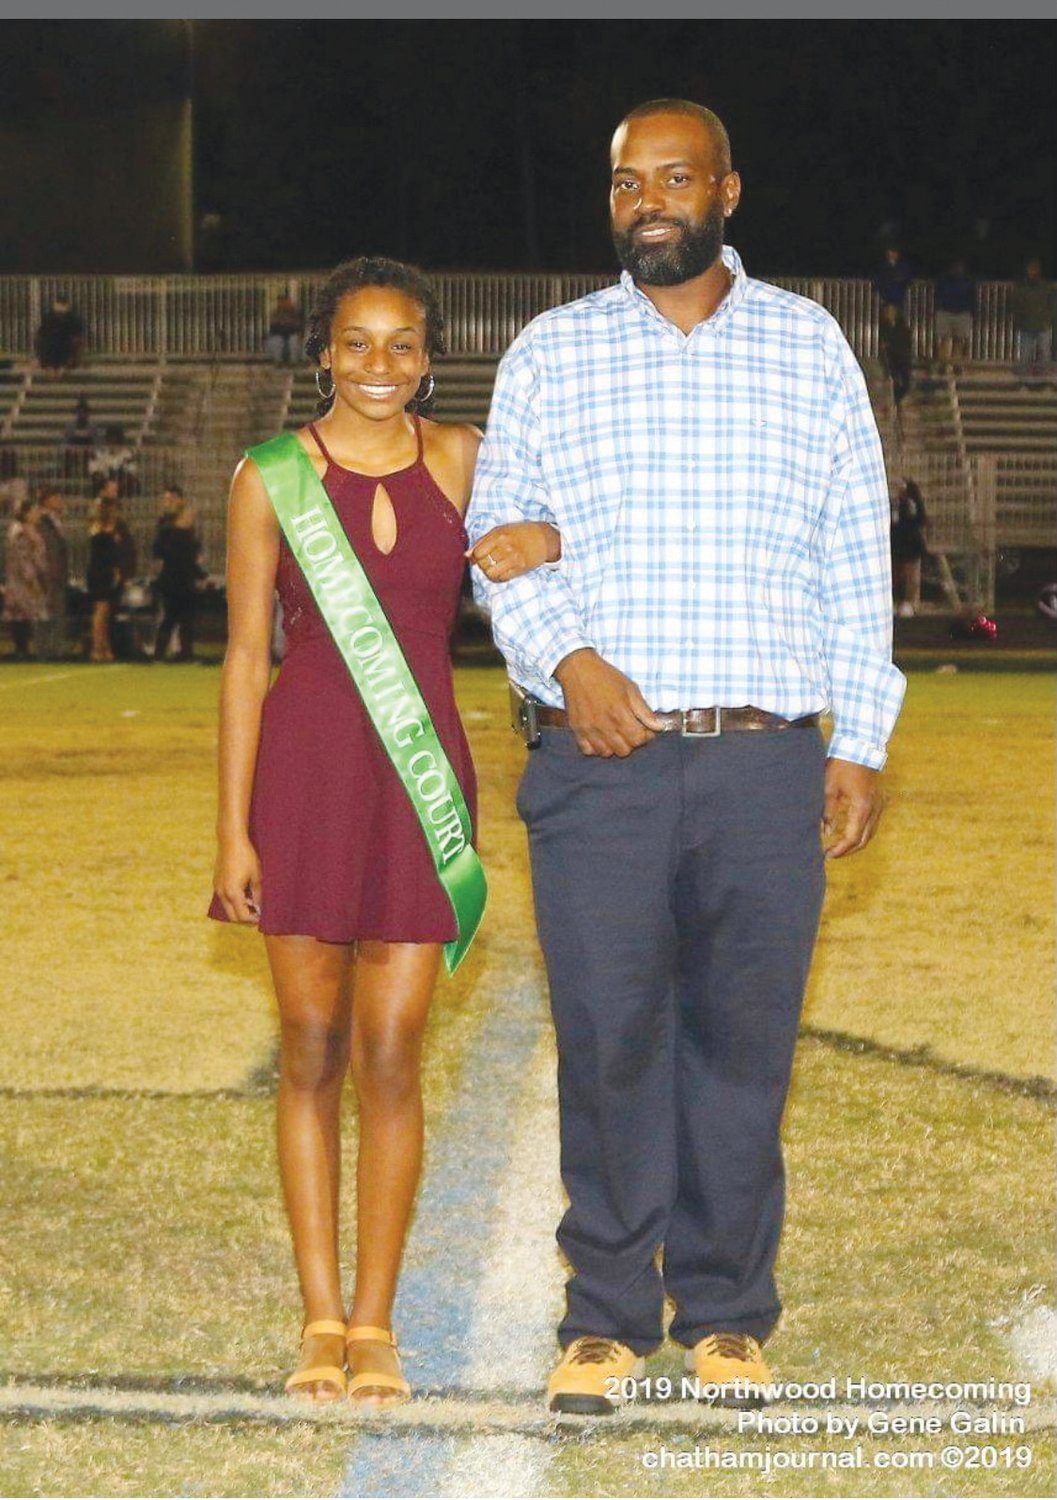 Airryn Wharton and her father, Reginald Wharton Jr., pose during a homecoming event at Northwood High School. (NOTE TO CASEA - please crop this photo from bottom up to remove the photo credit).